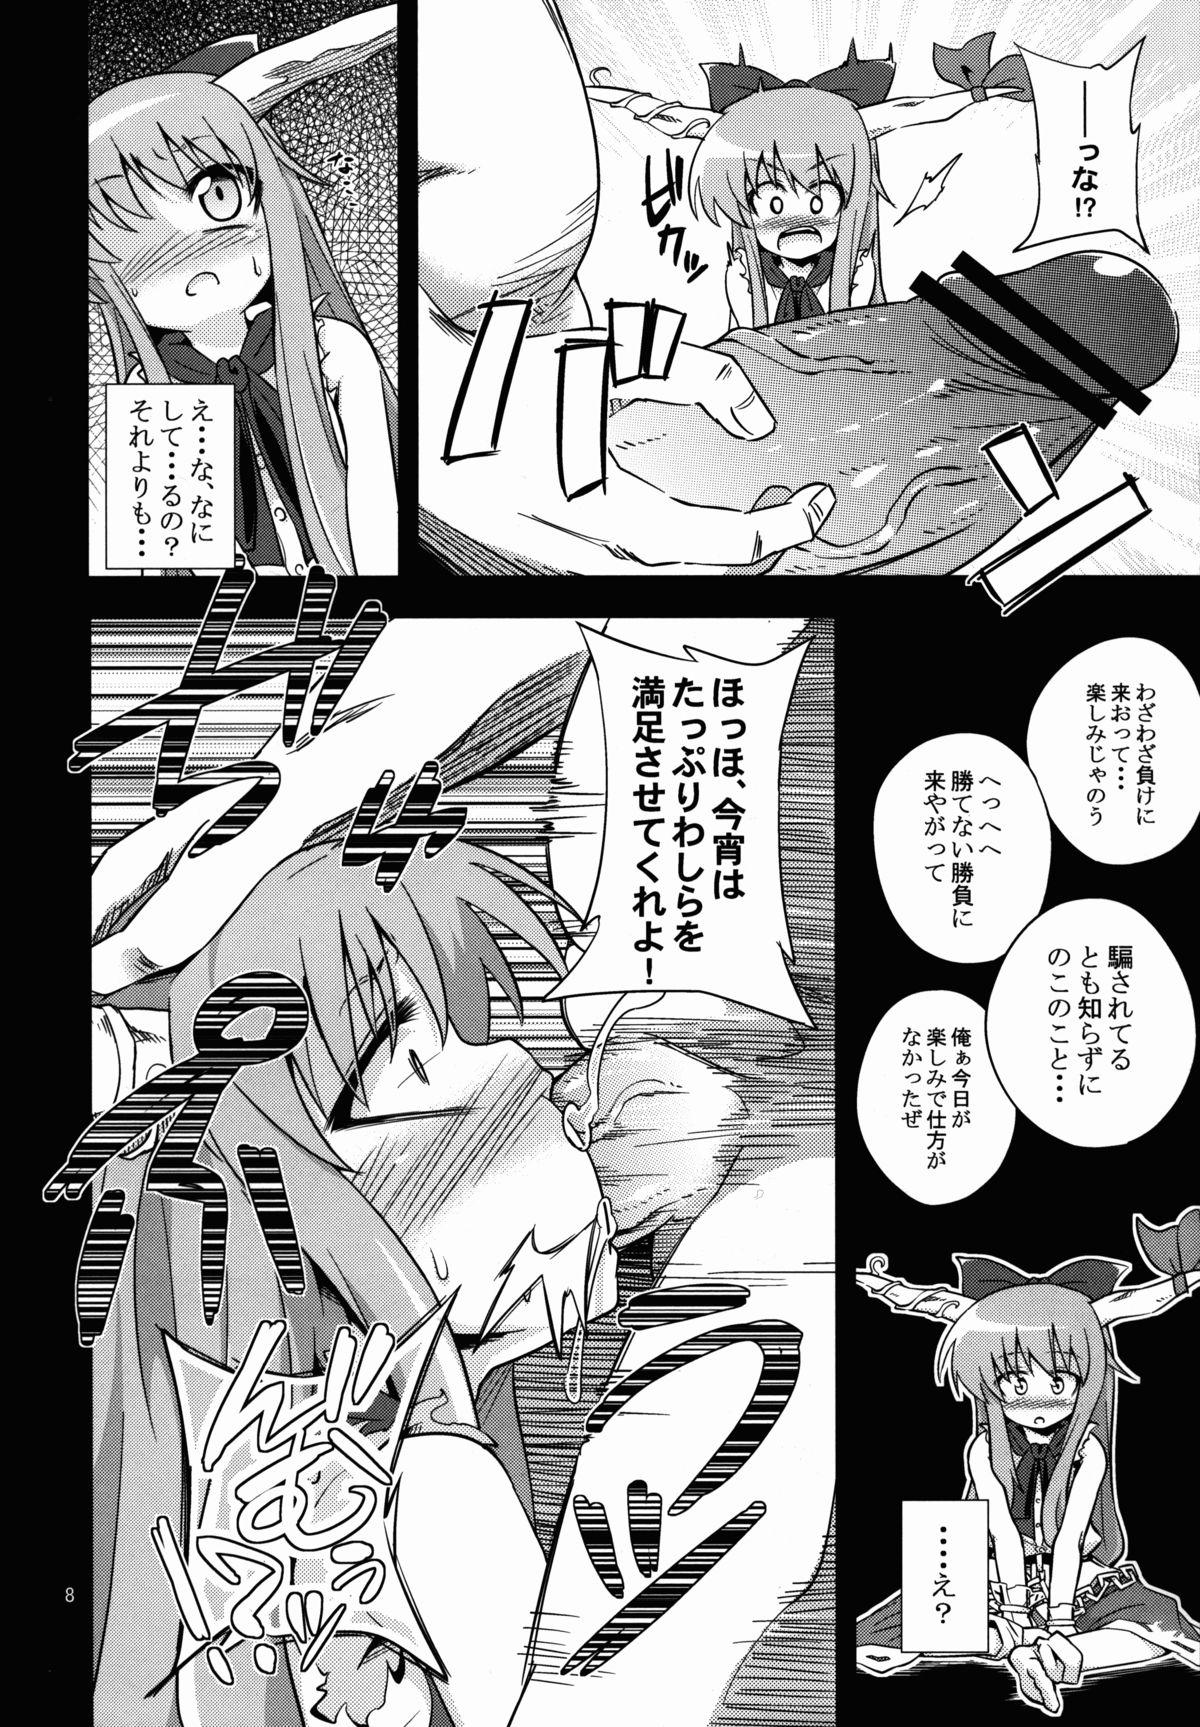 Femboy 鬼犯嘘犯喜 - Touhou project Clothed Sex - Page 8